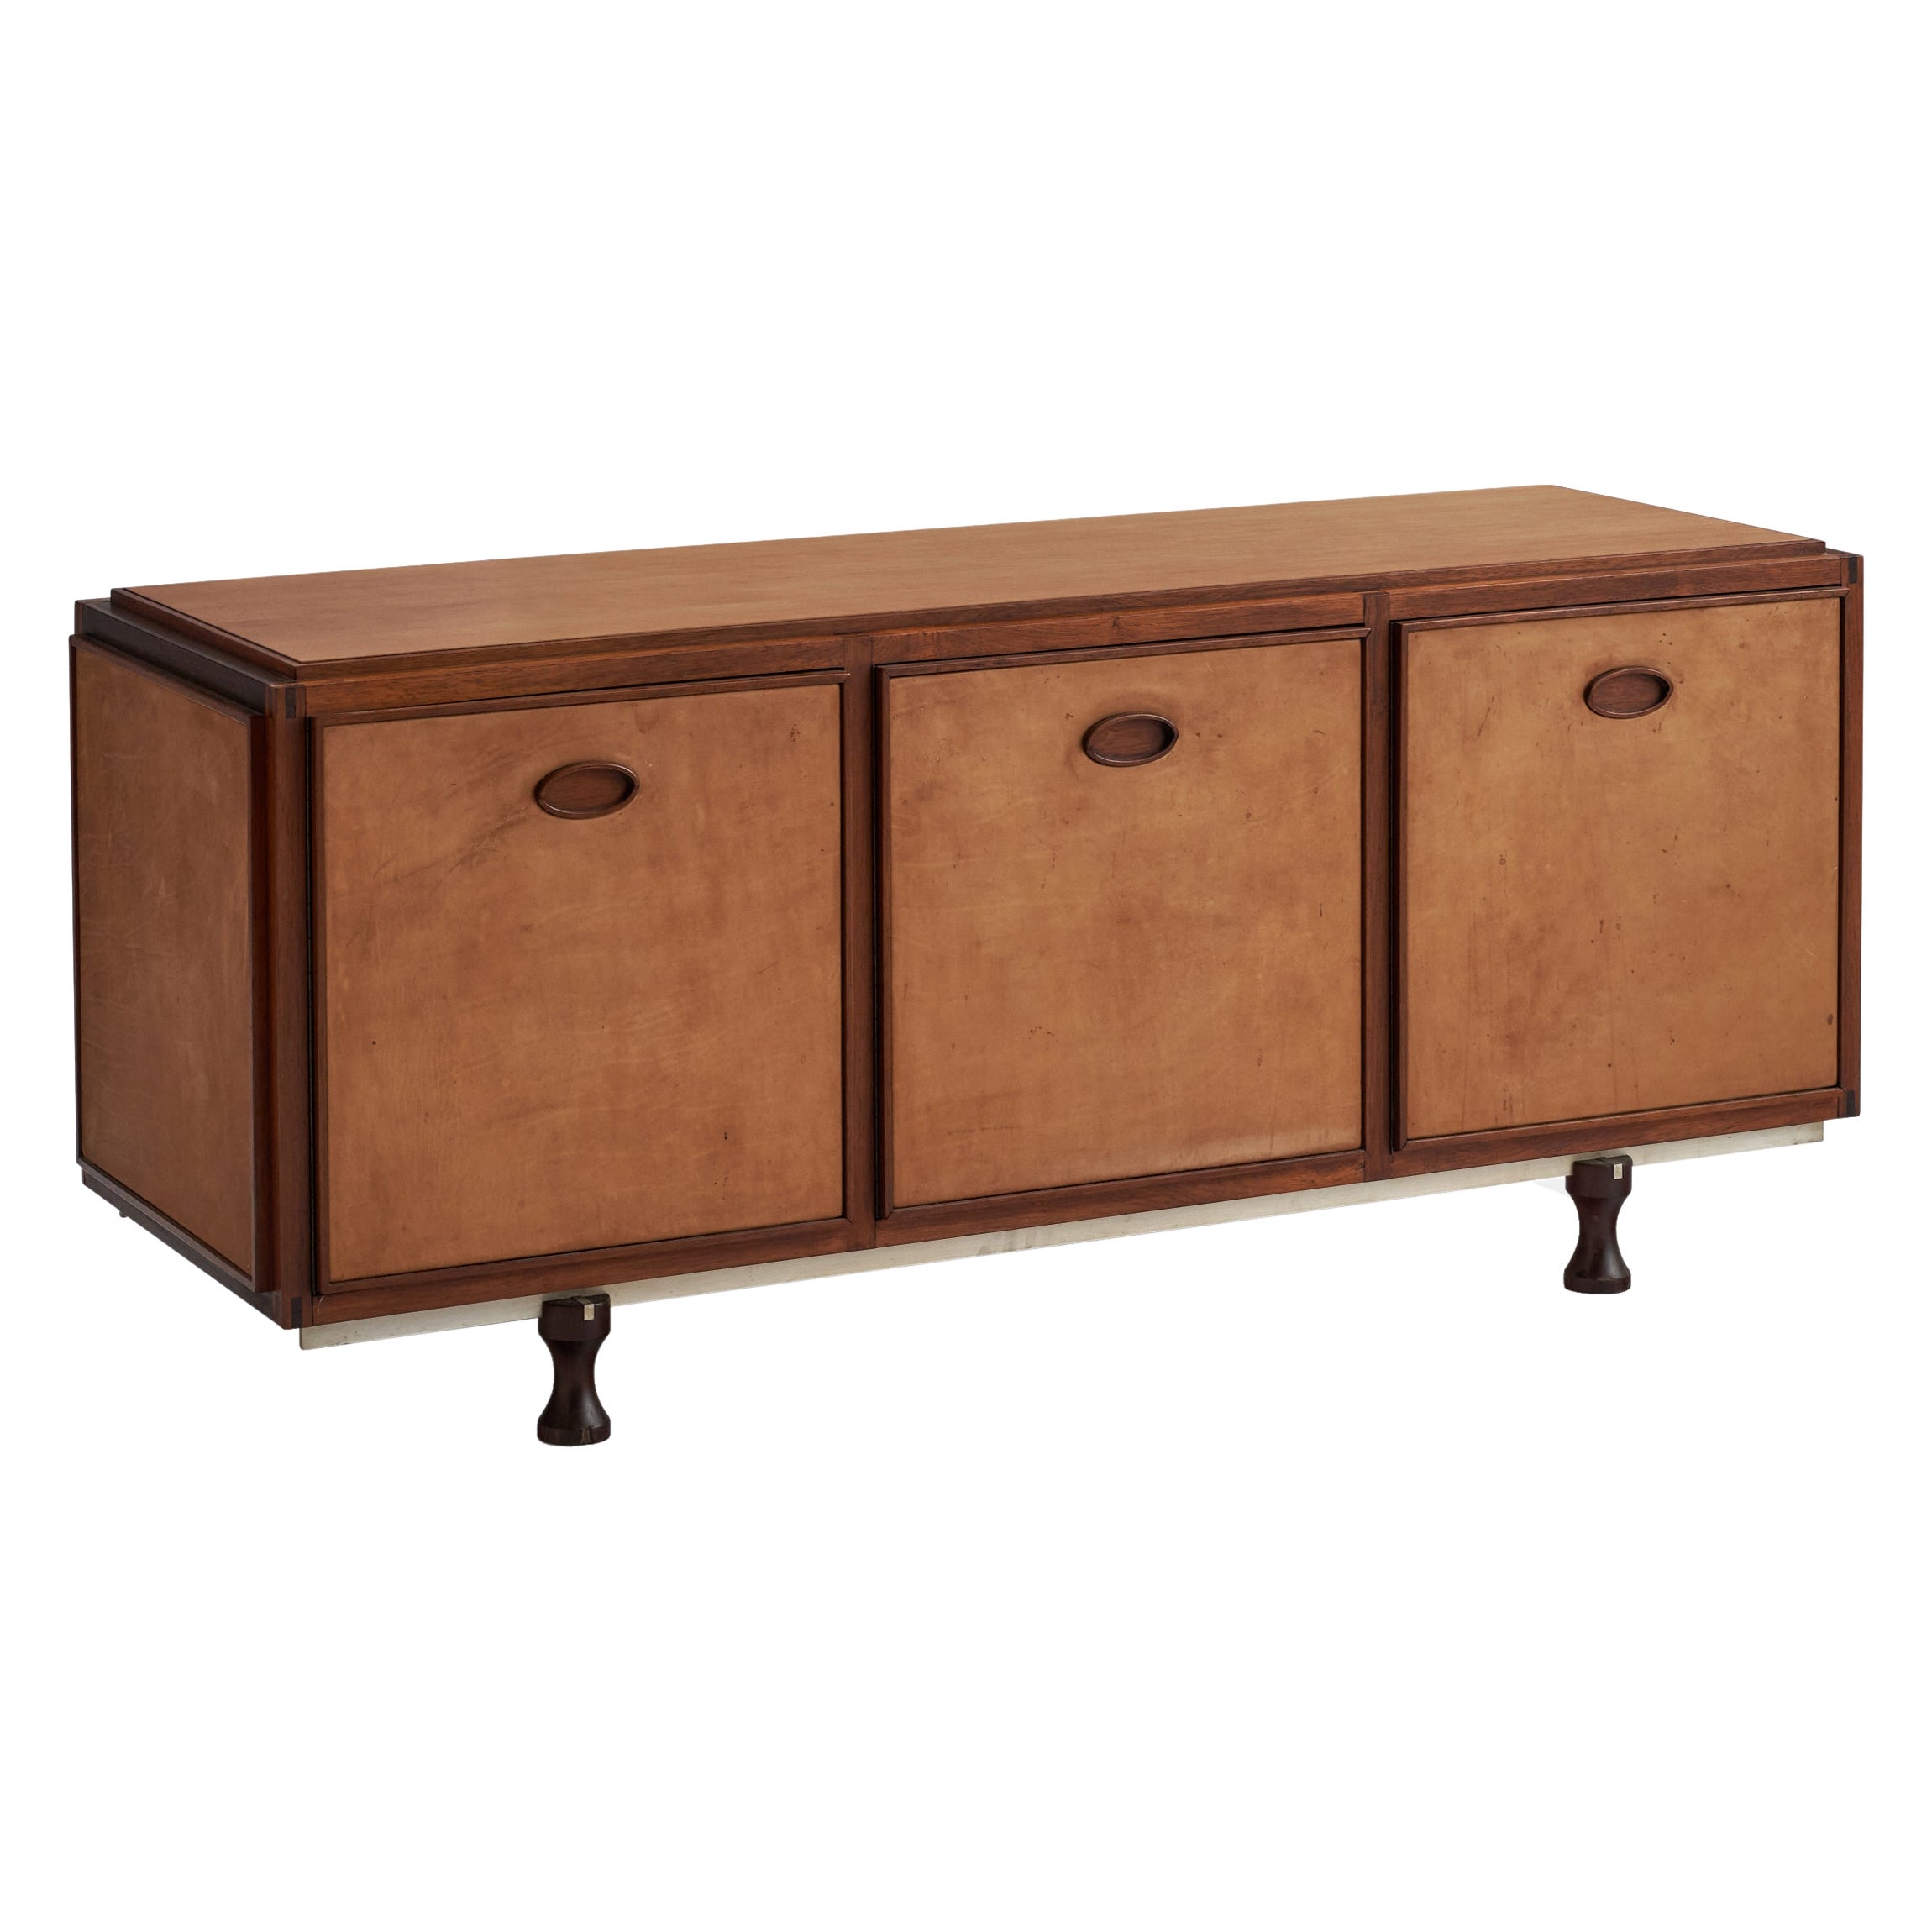 Gianfranco Frattini, Unique Sideboard, Rosewood, Leather, Steel, Italy, 1950s For Sale